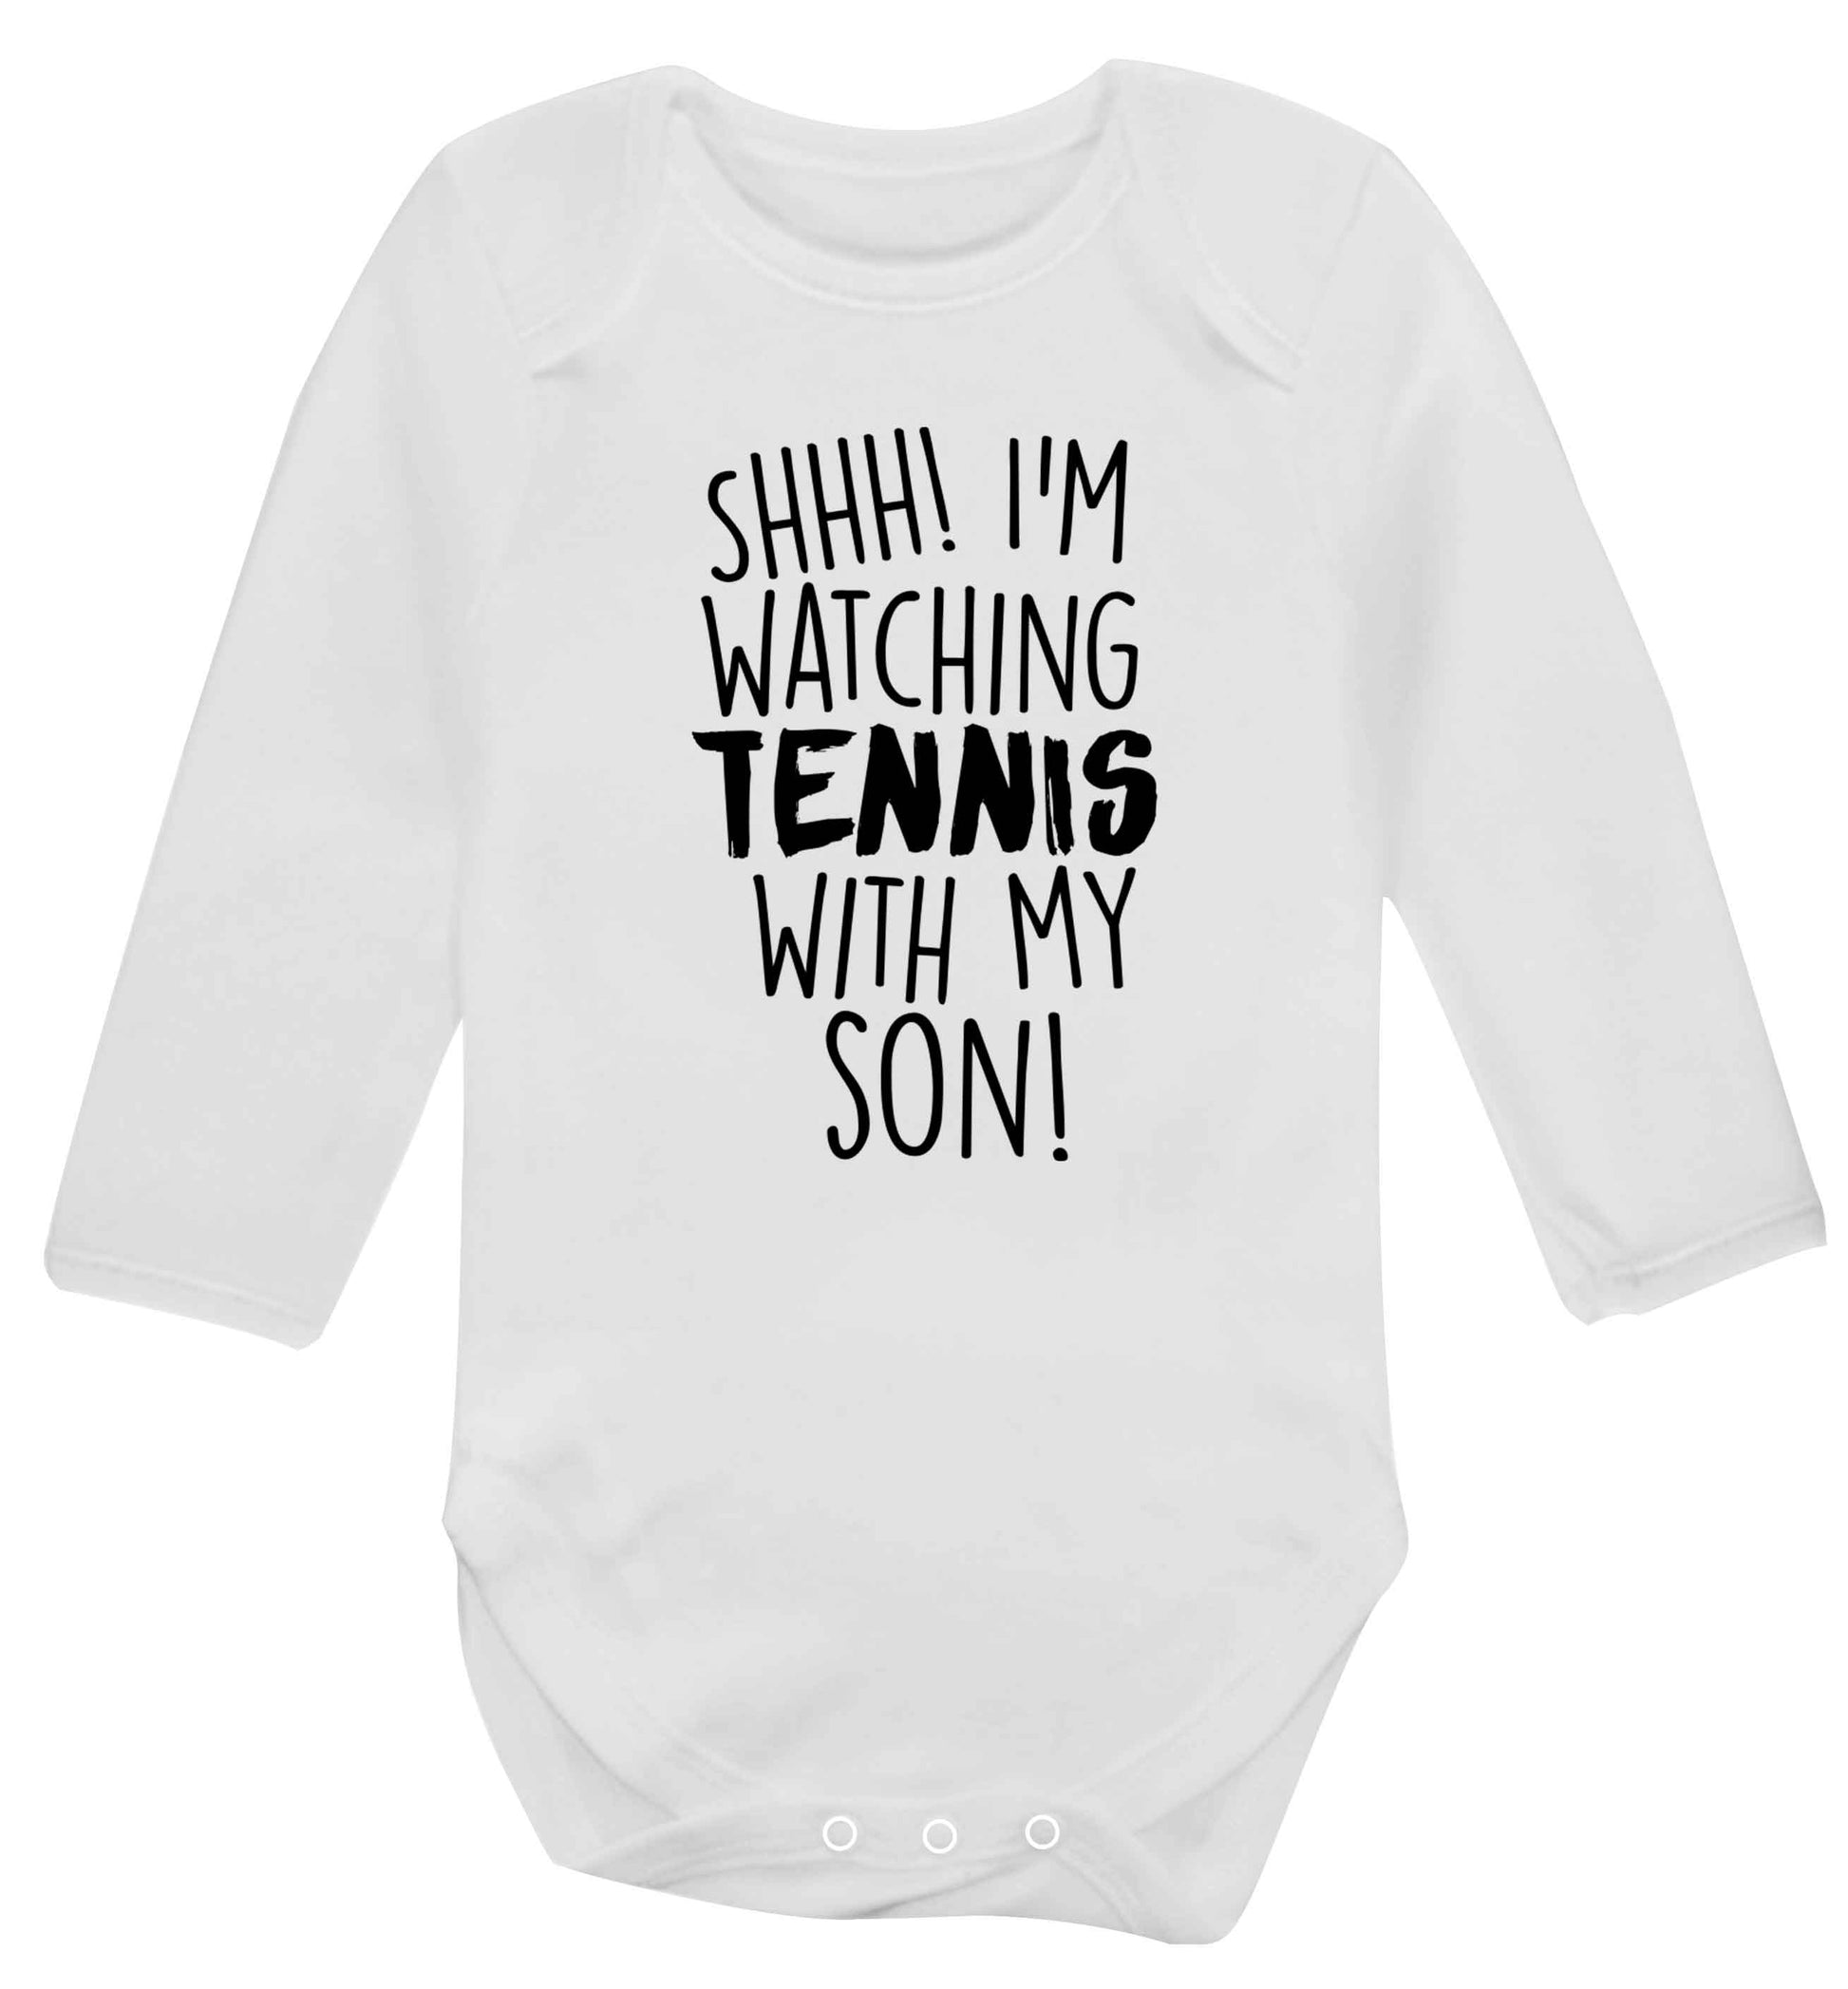 Shh! I'm watching tennis with my son! Baby Vest long sleeved white 6-12 months